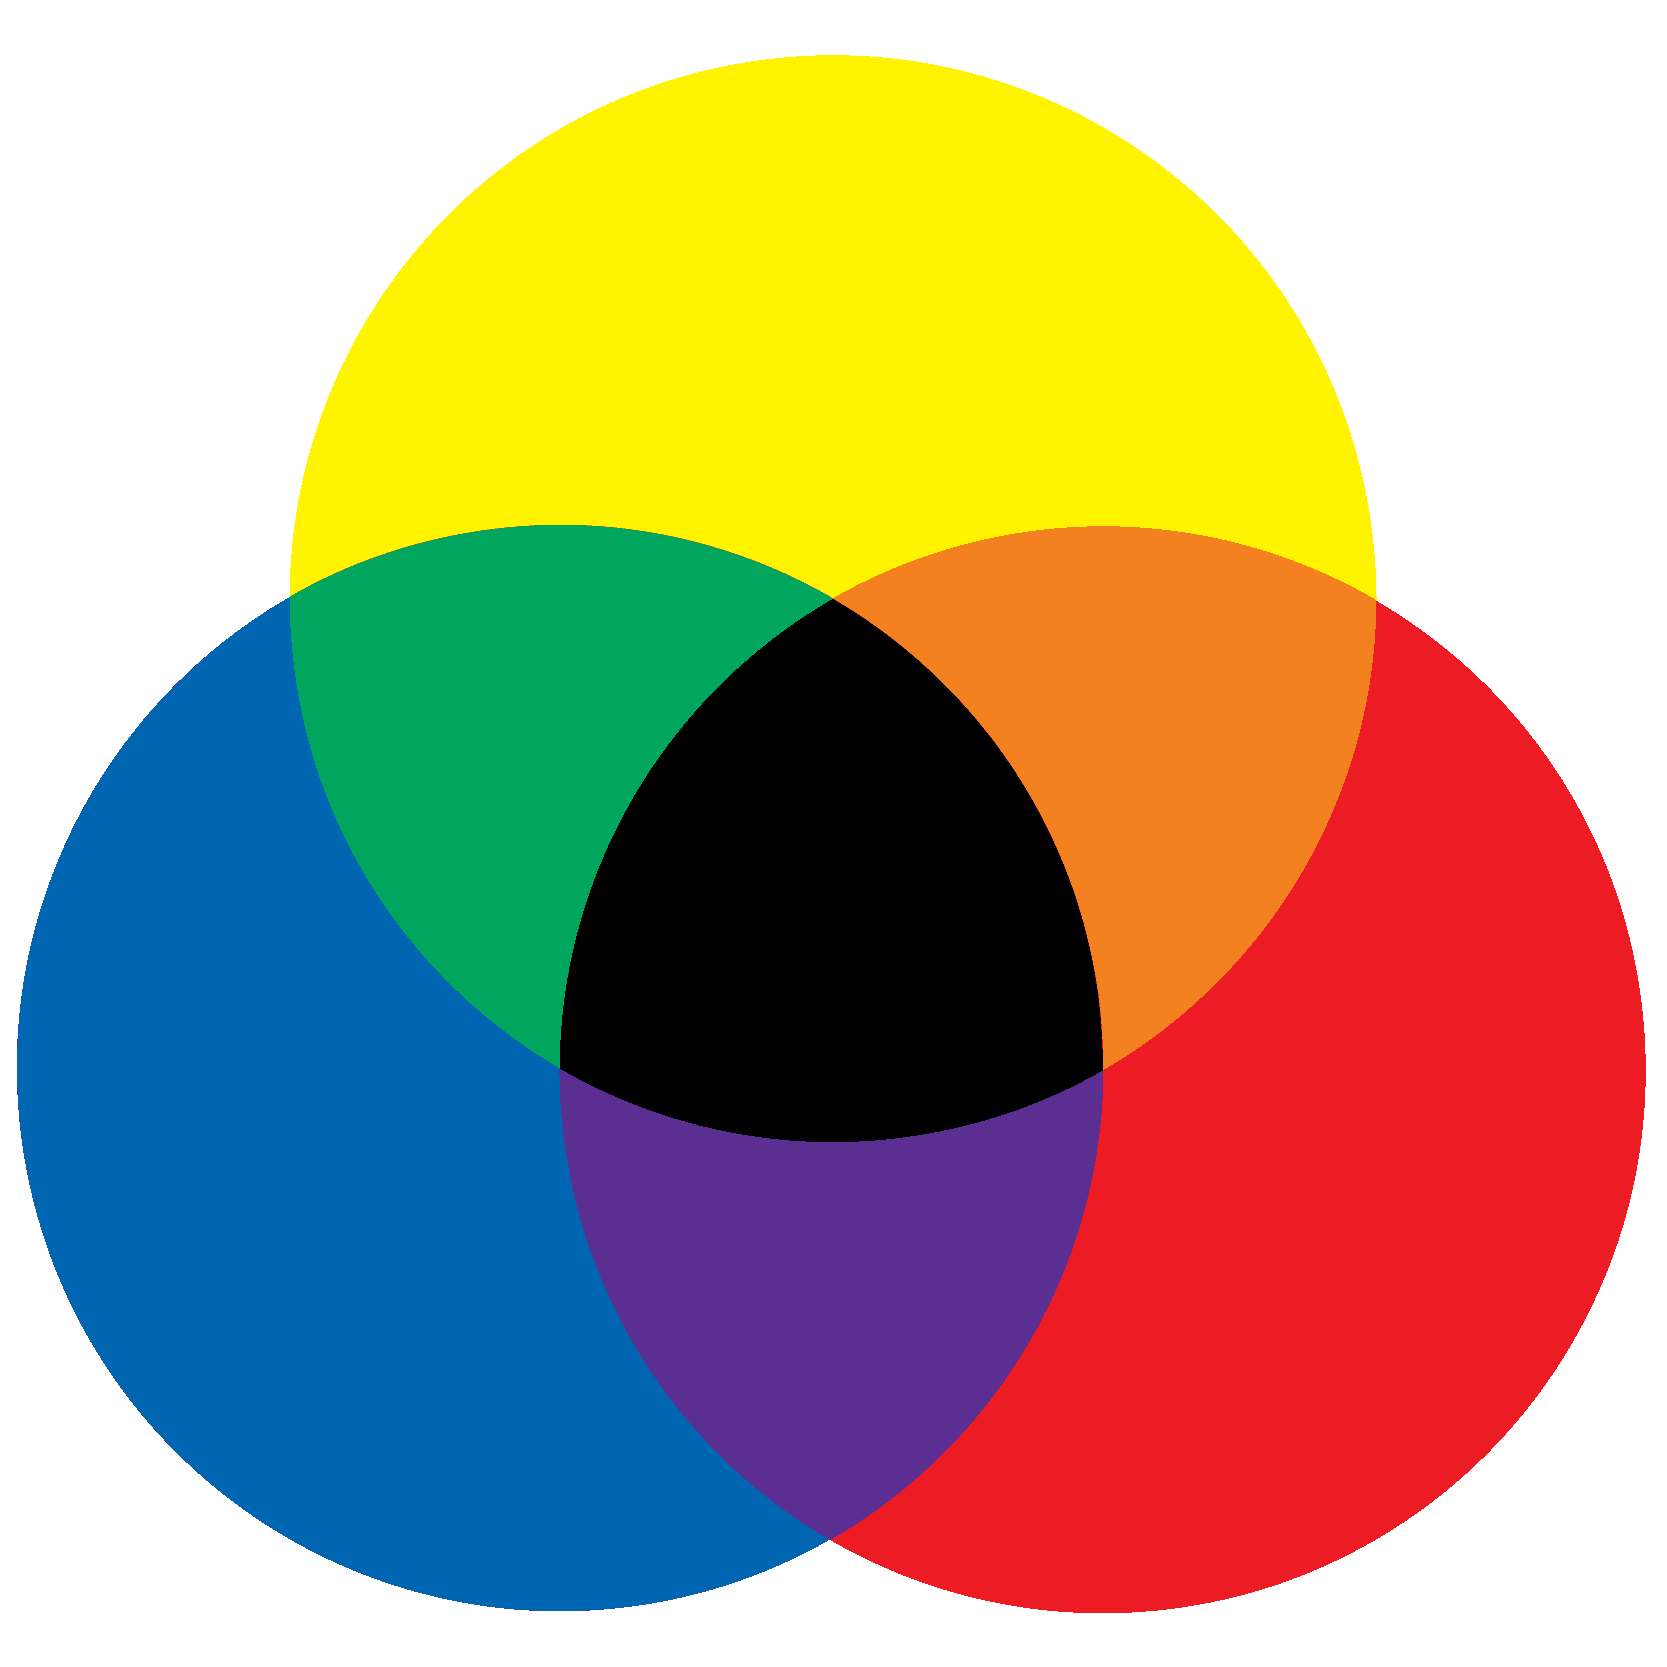 The RYB colour system: the 3 primaries when overlapping form black.